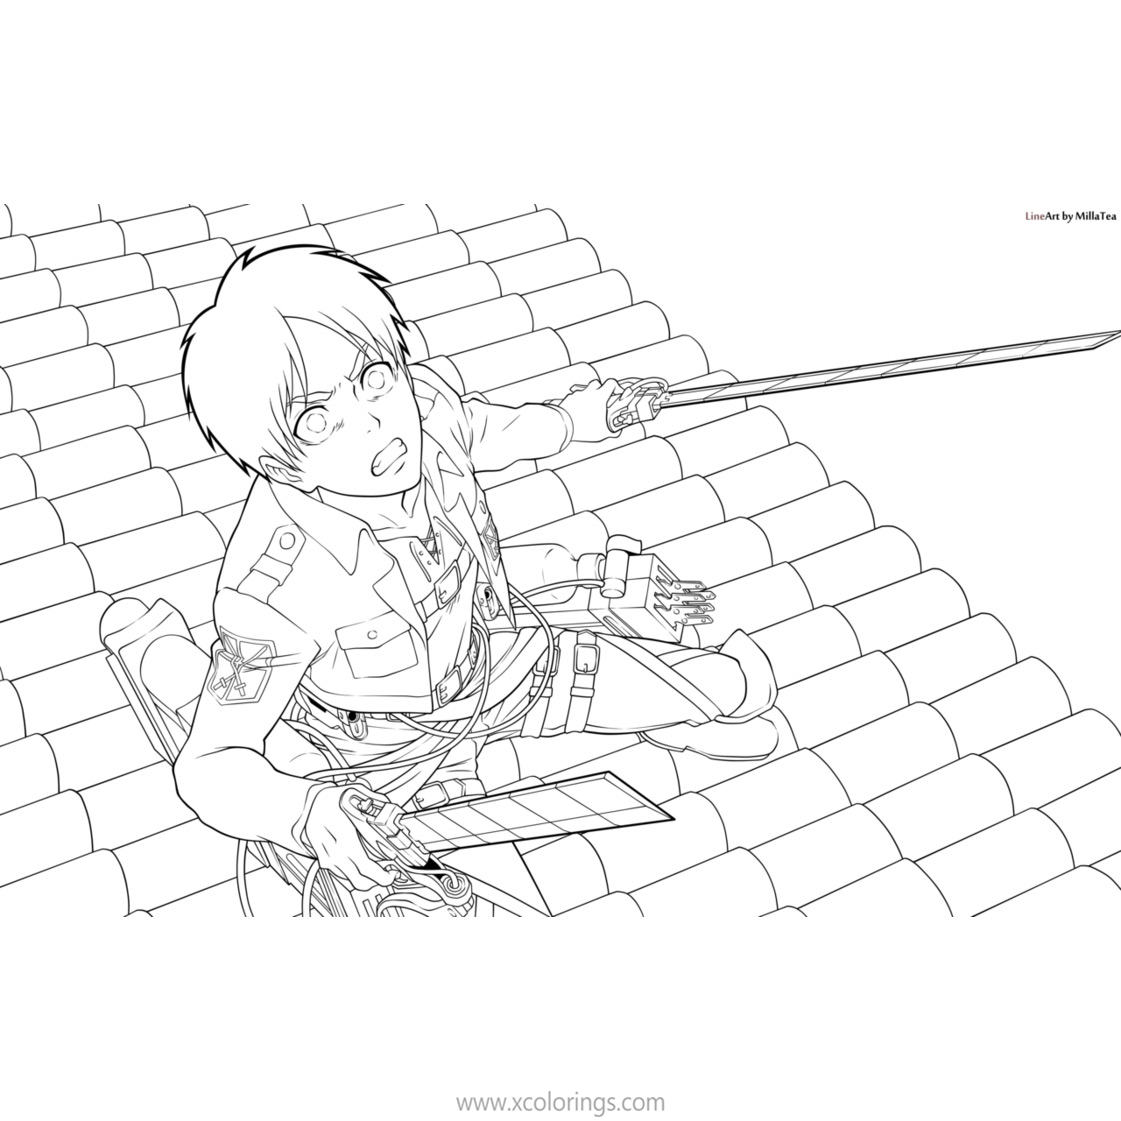 Free Attack On Titan Coloring Pages Levi Lineart by Milla Tea printable